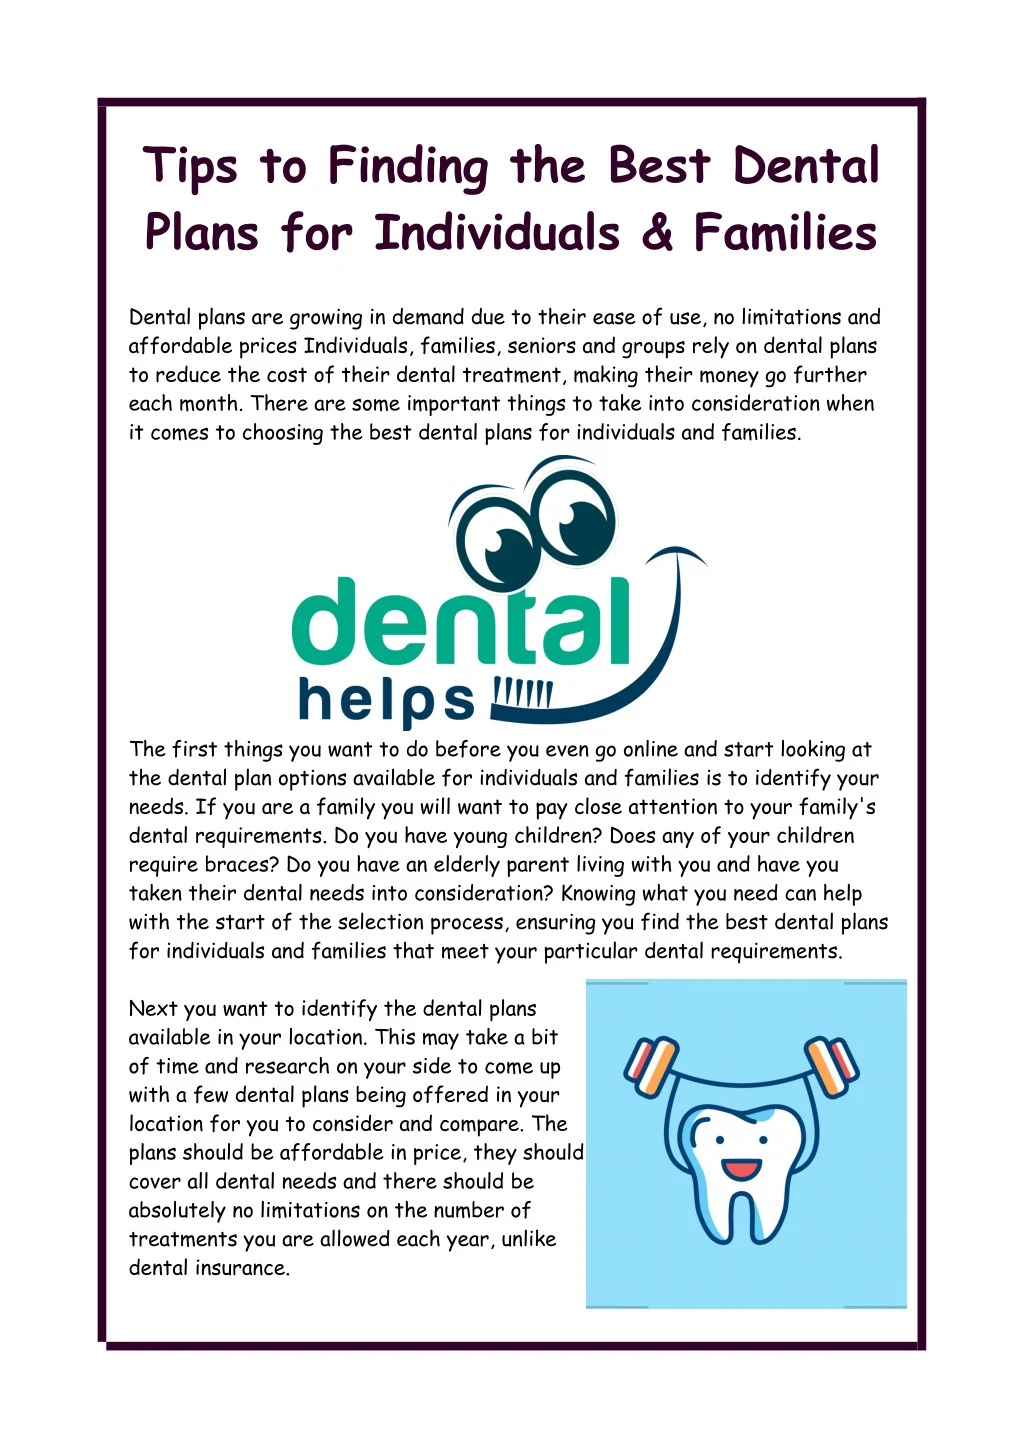 tips to finding the best dental plans